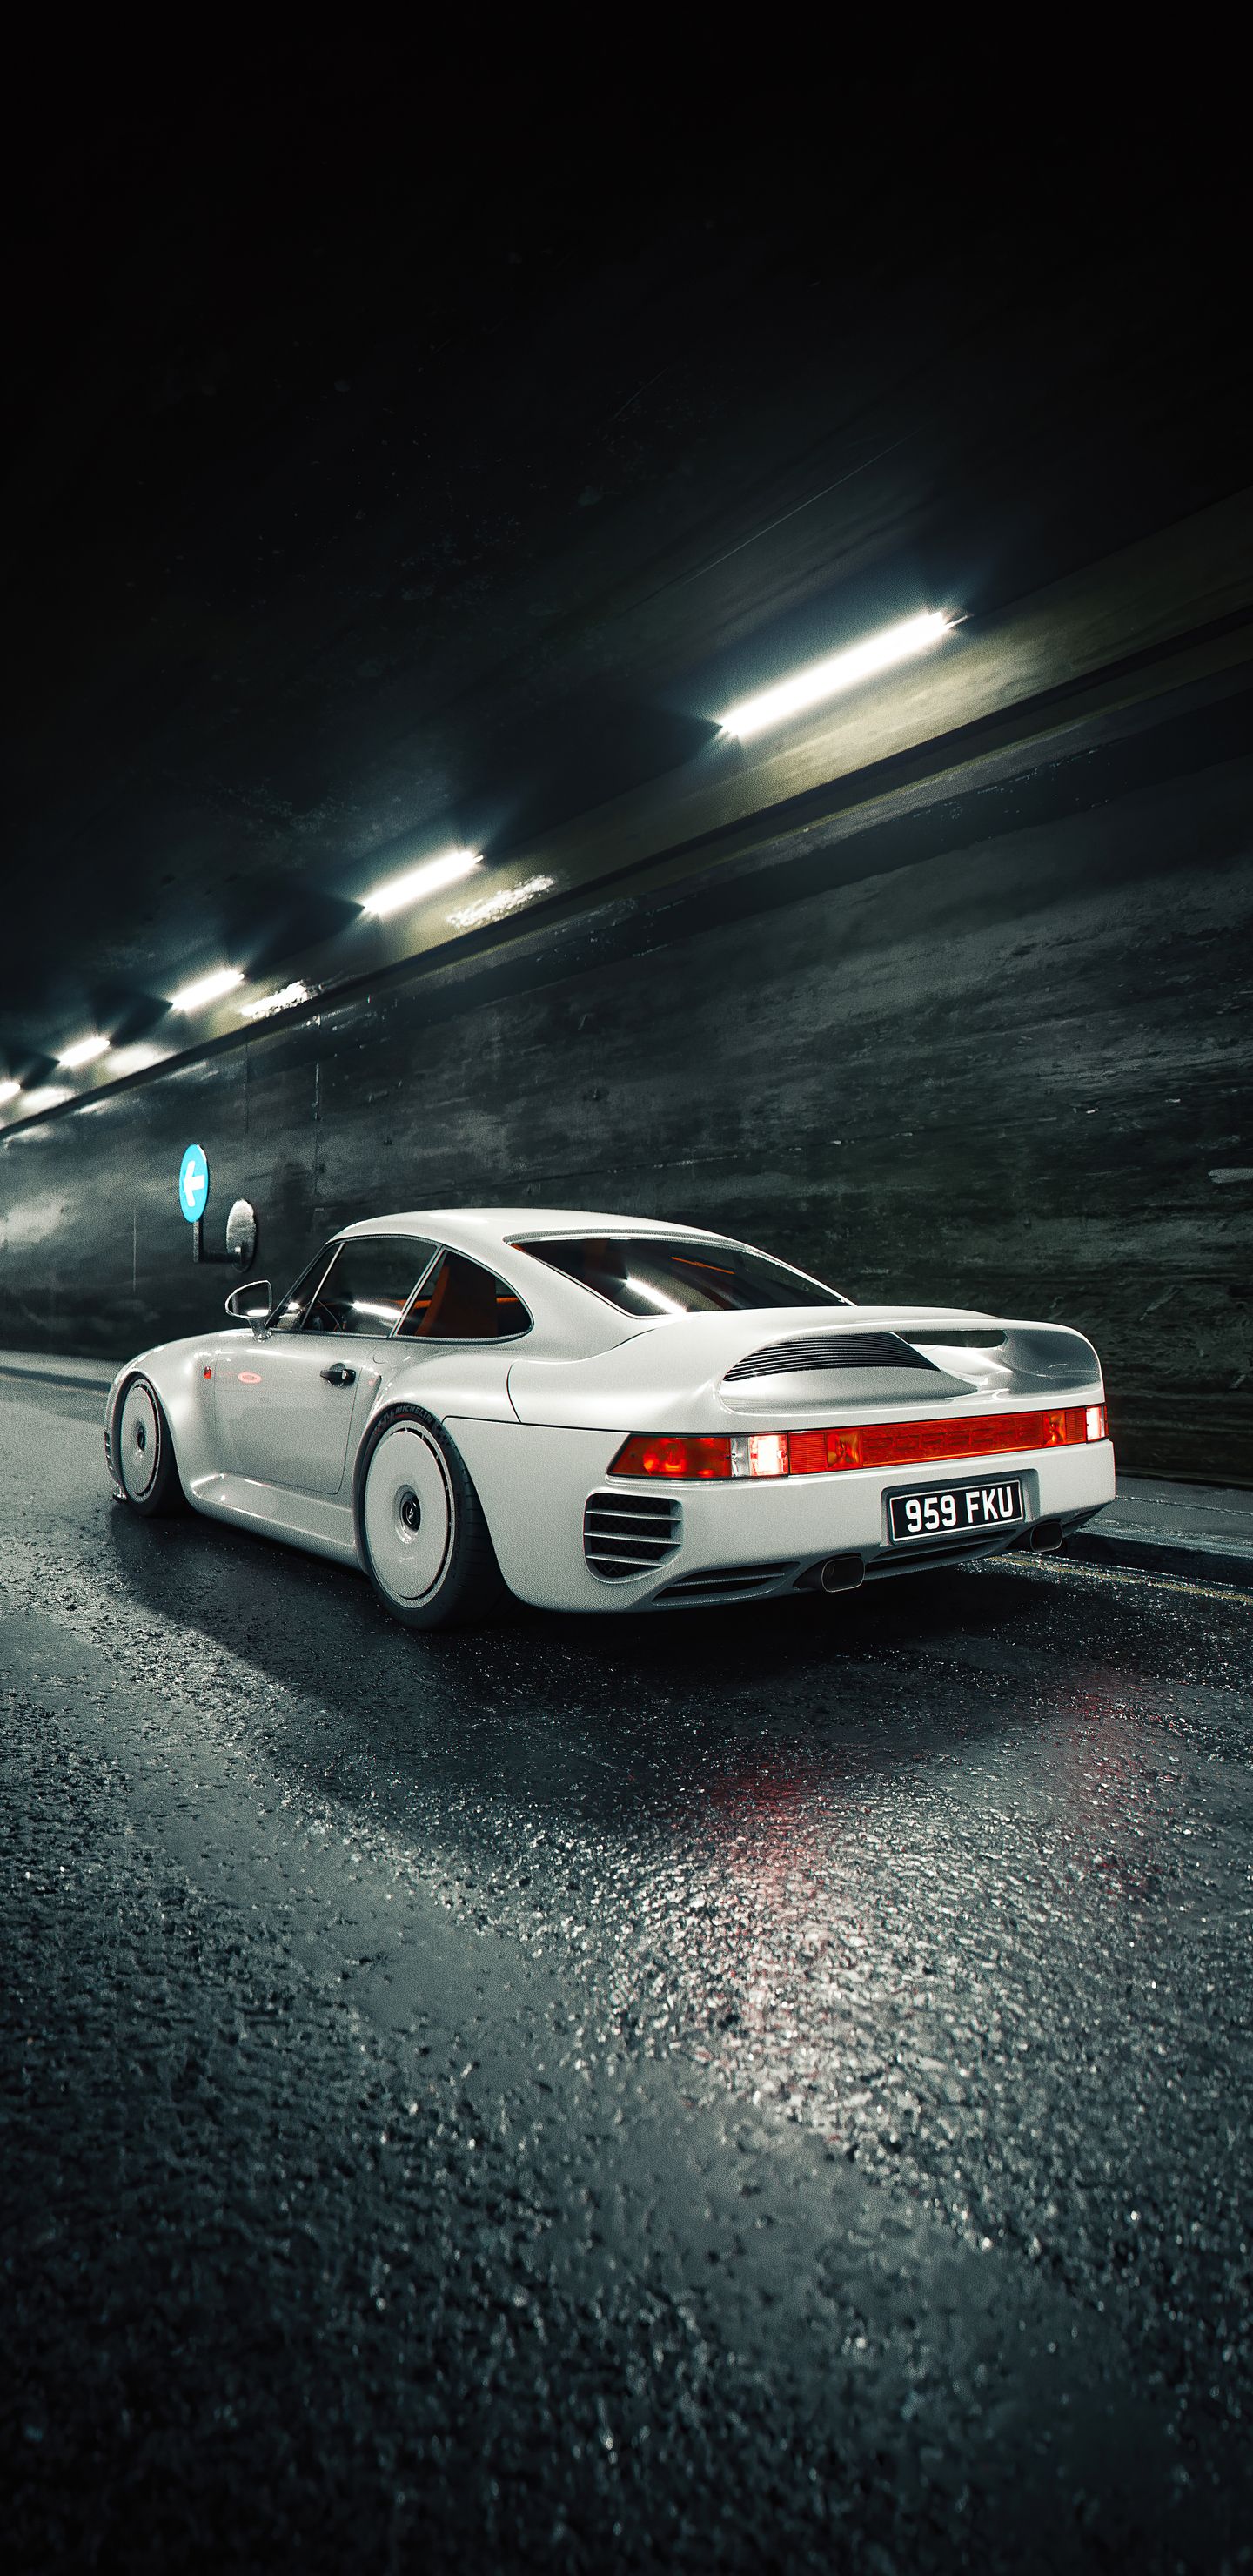 Porsche 959 Grb Prototype 4k Samsung Galaxy Note S S SQHD HD 4k Wallpaper, Image, Background, Photo and Picture